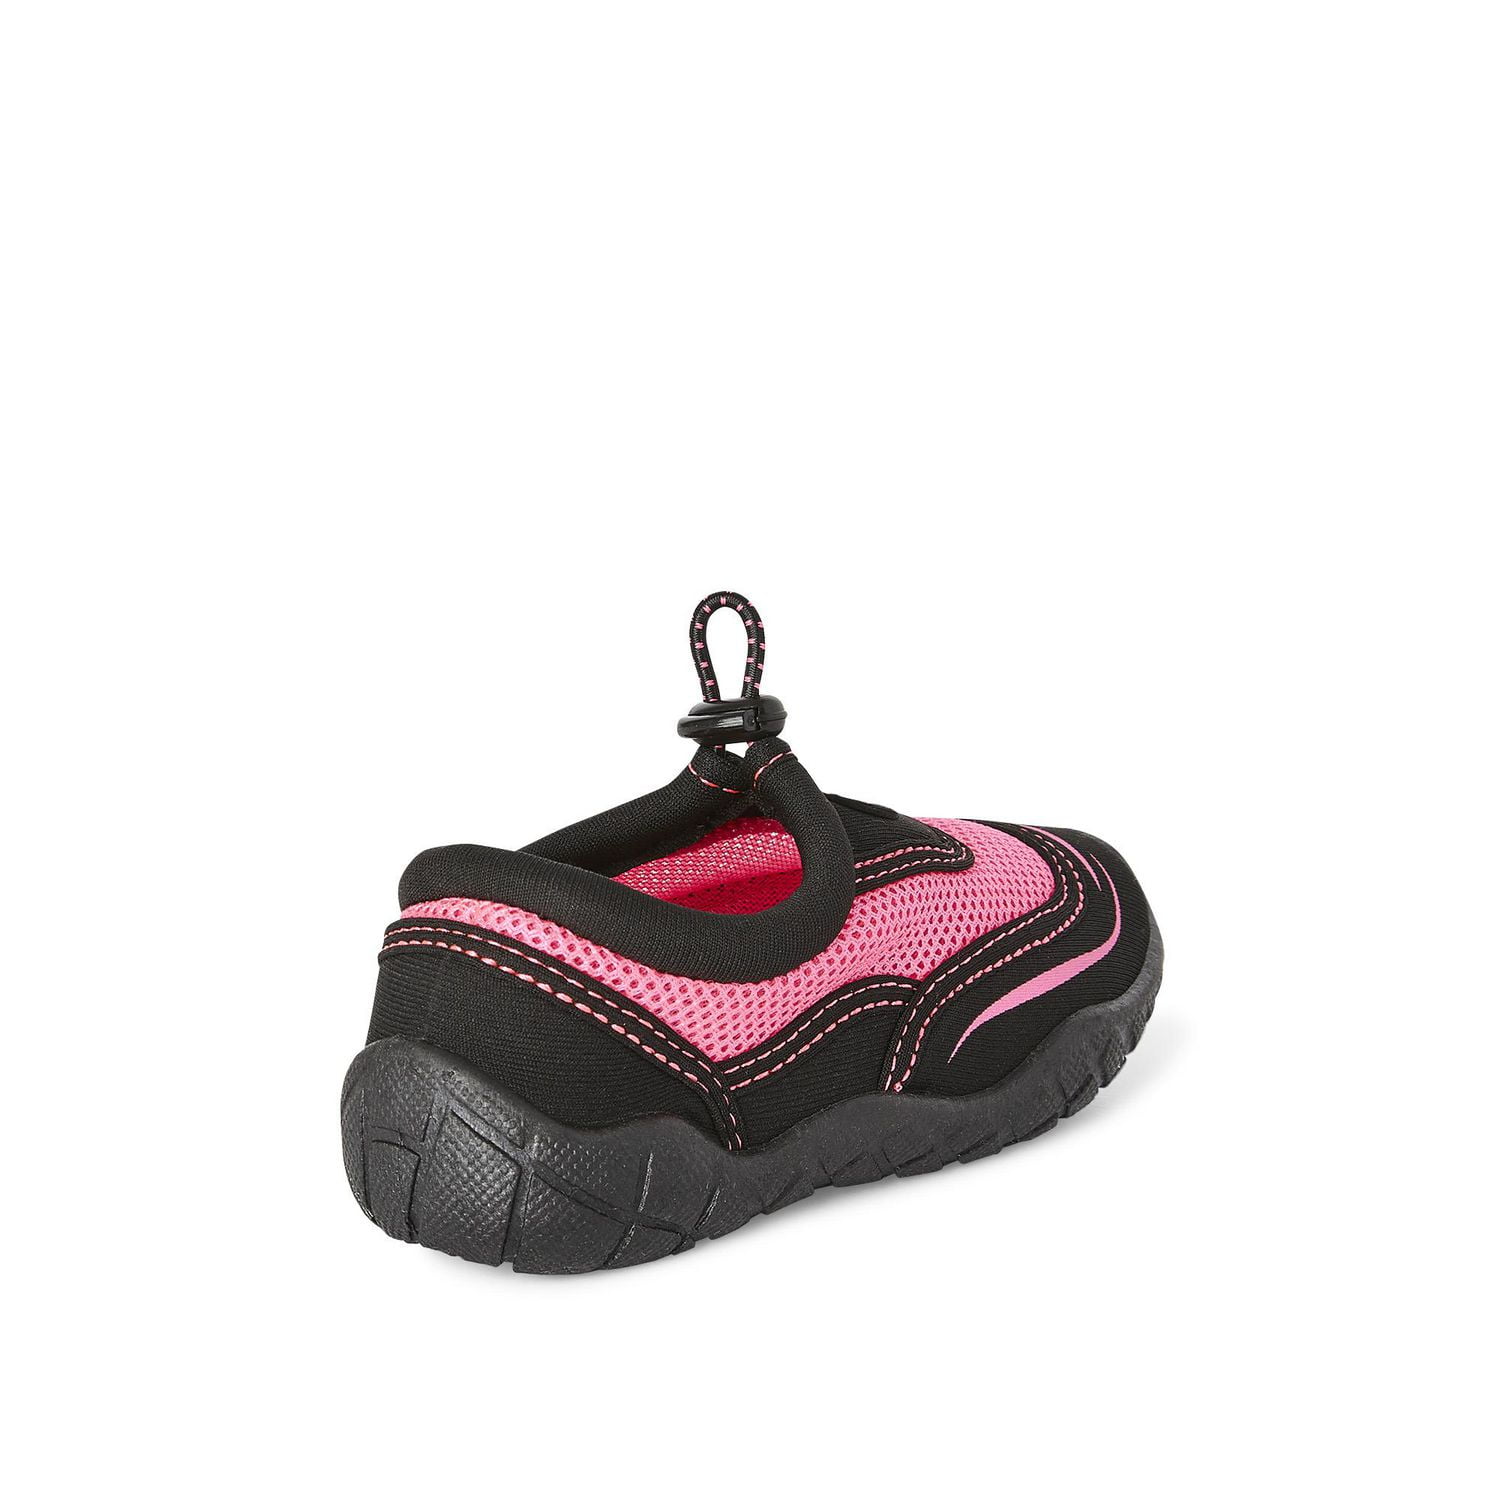 Kids Athletic Works Shoes on Sale at Walmart today!